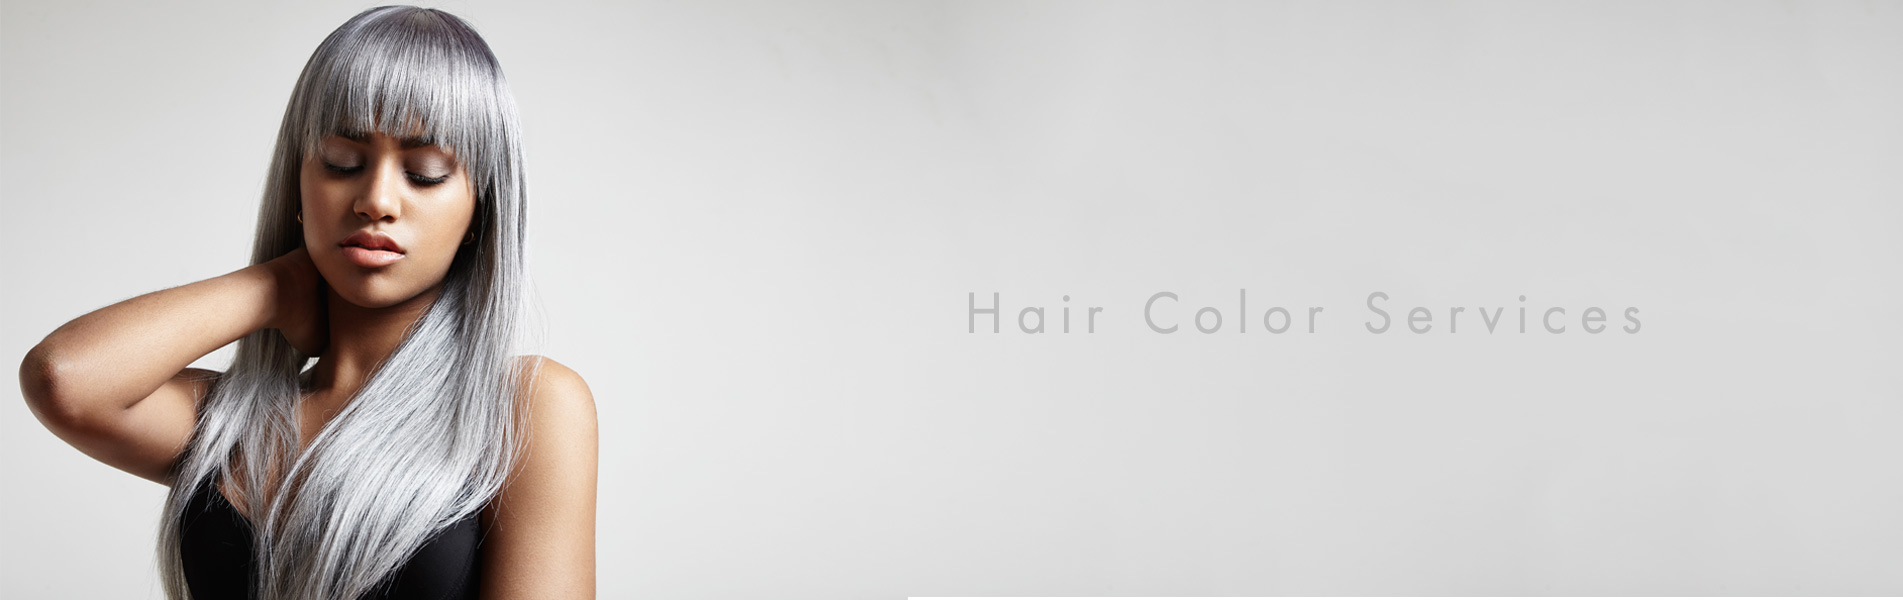 Hair Color In Norwich Ct Professional Hair Color Services